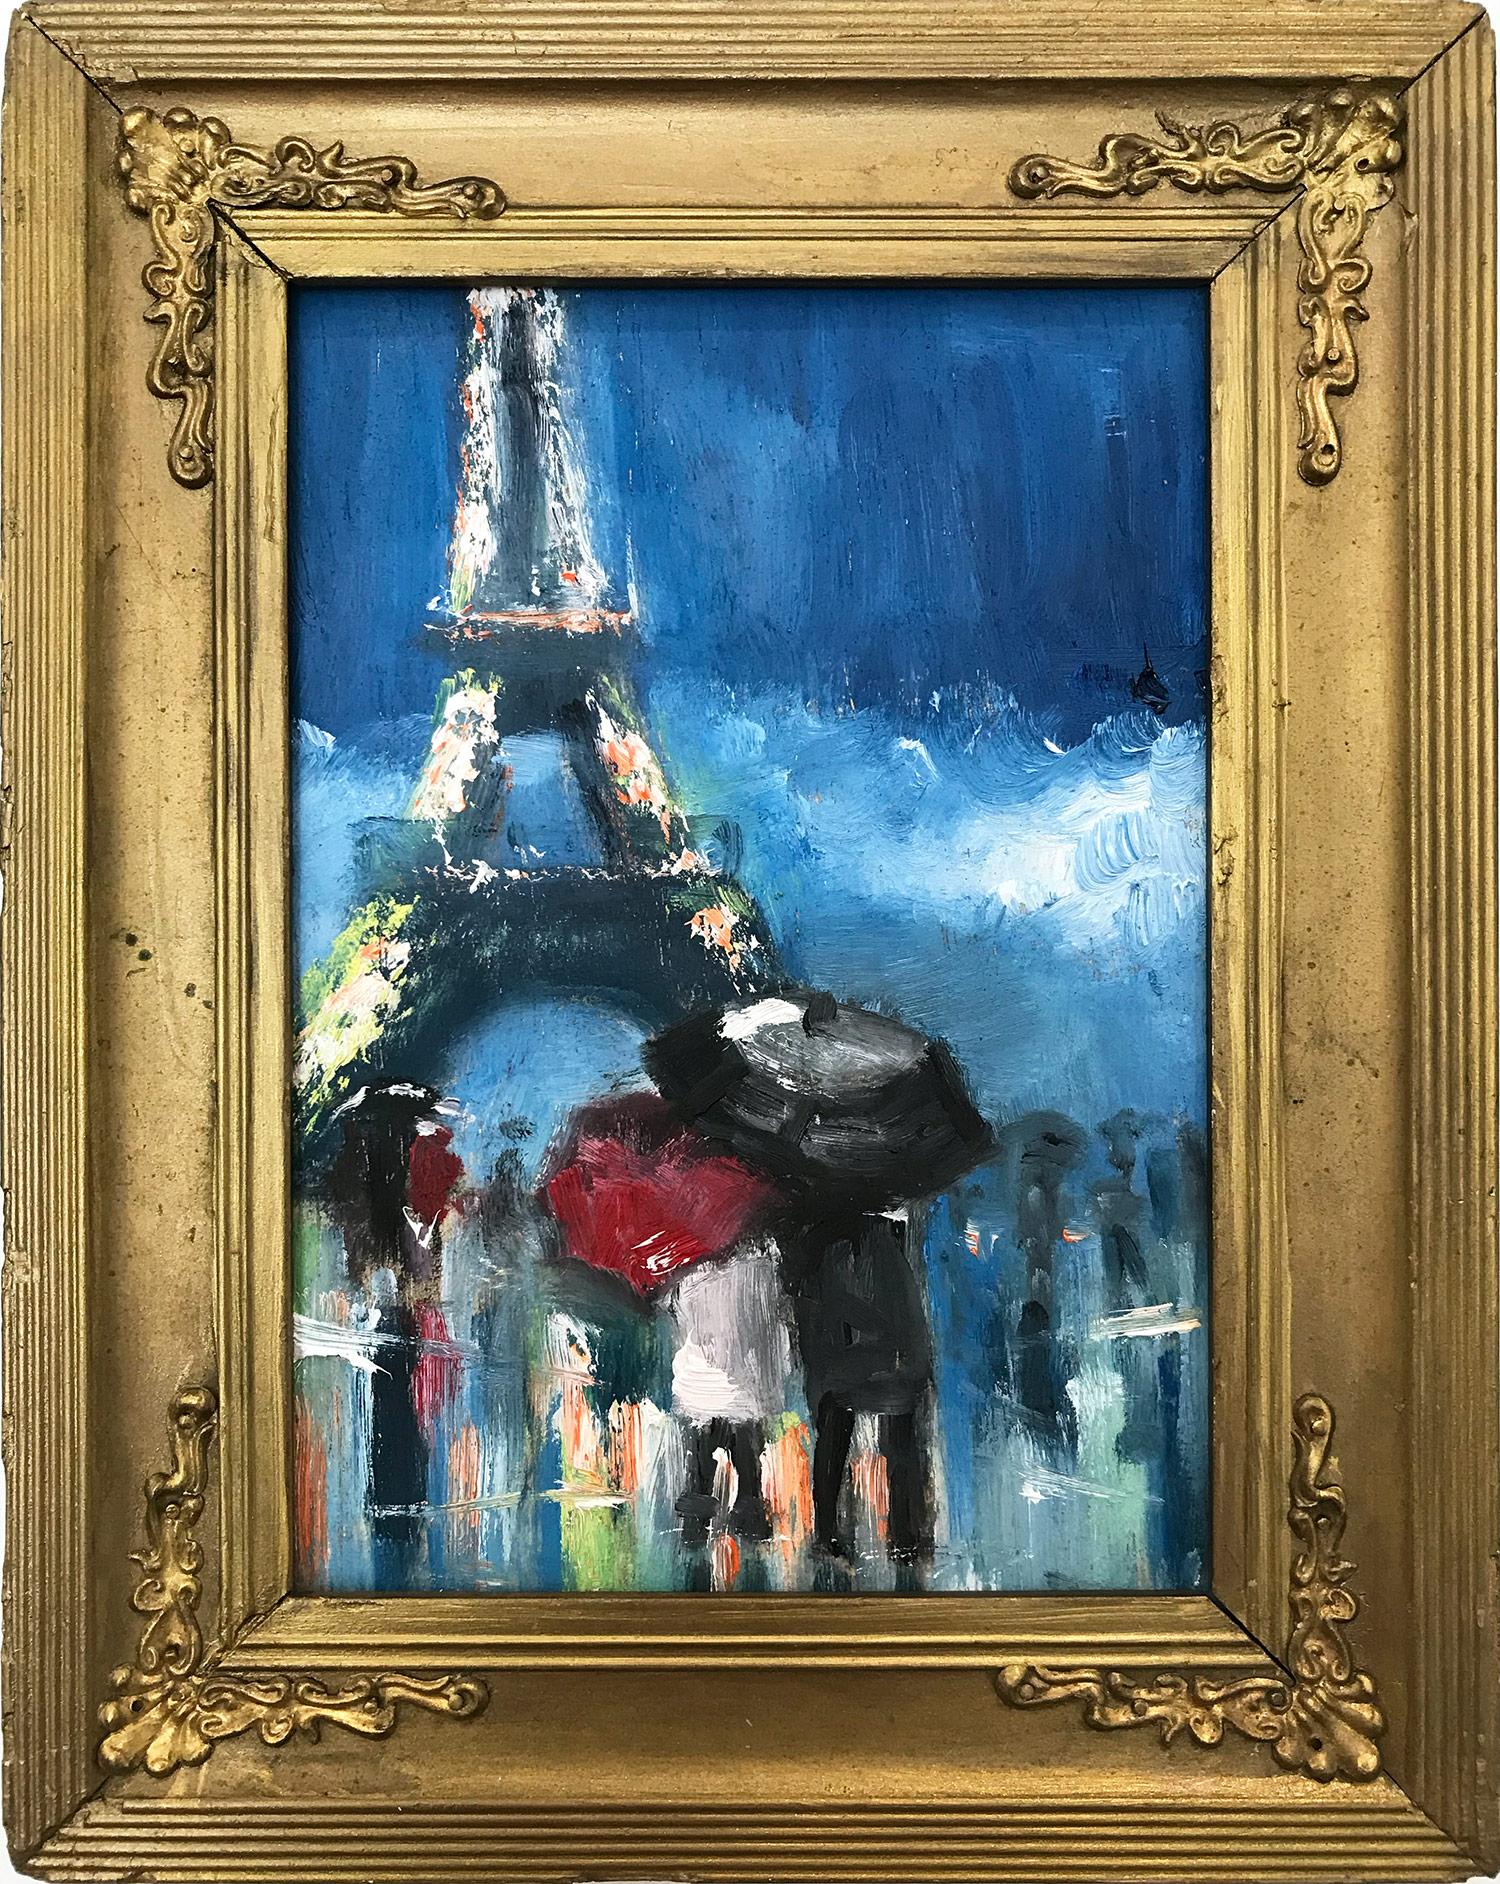 Cindy Shaoul Landscape Painting - "Just You and Me" Impressionistic Oil Painting of Figures by Eiffel Tower, Paris